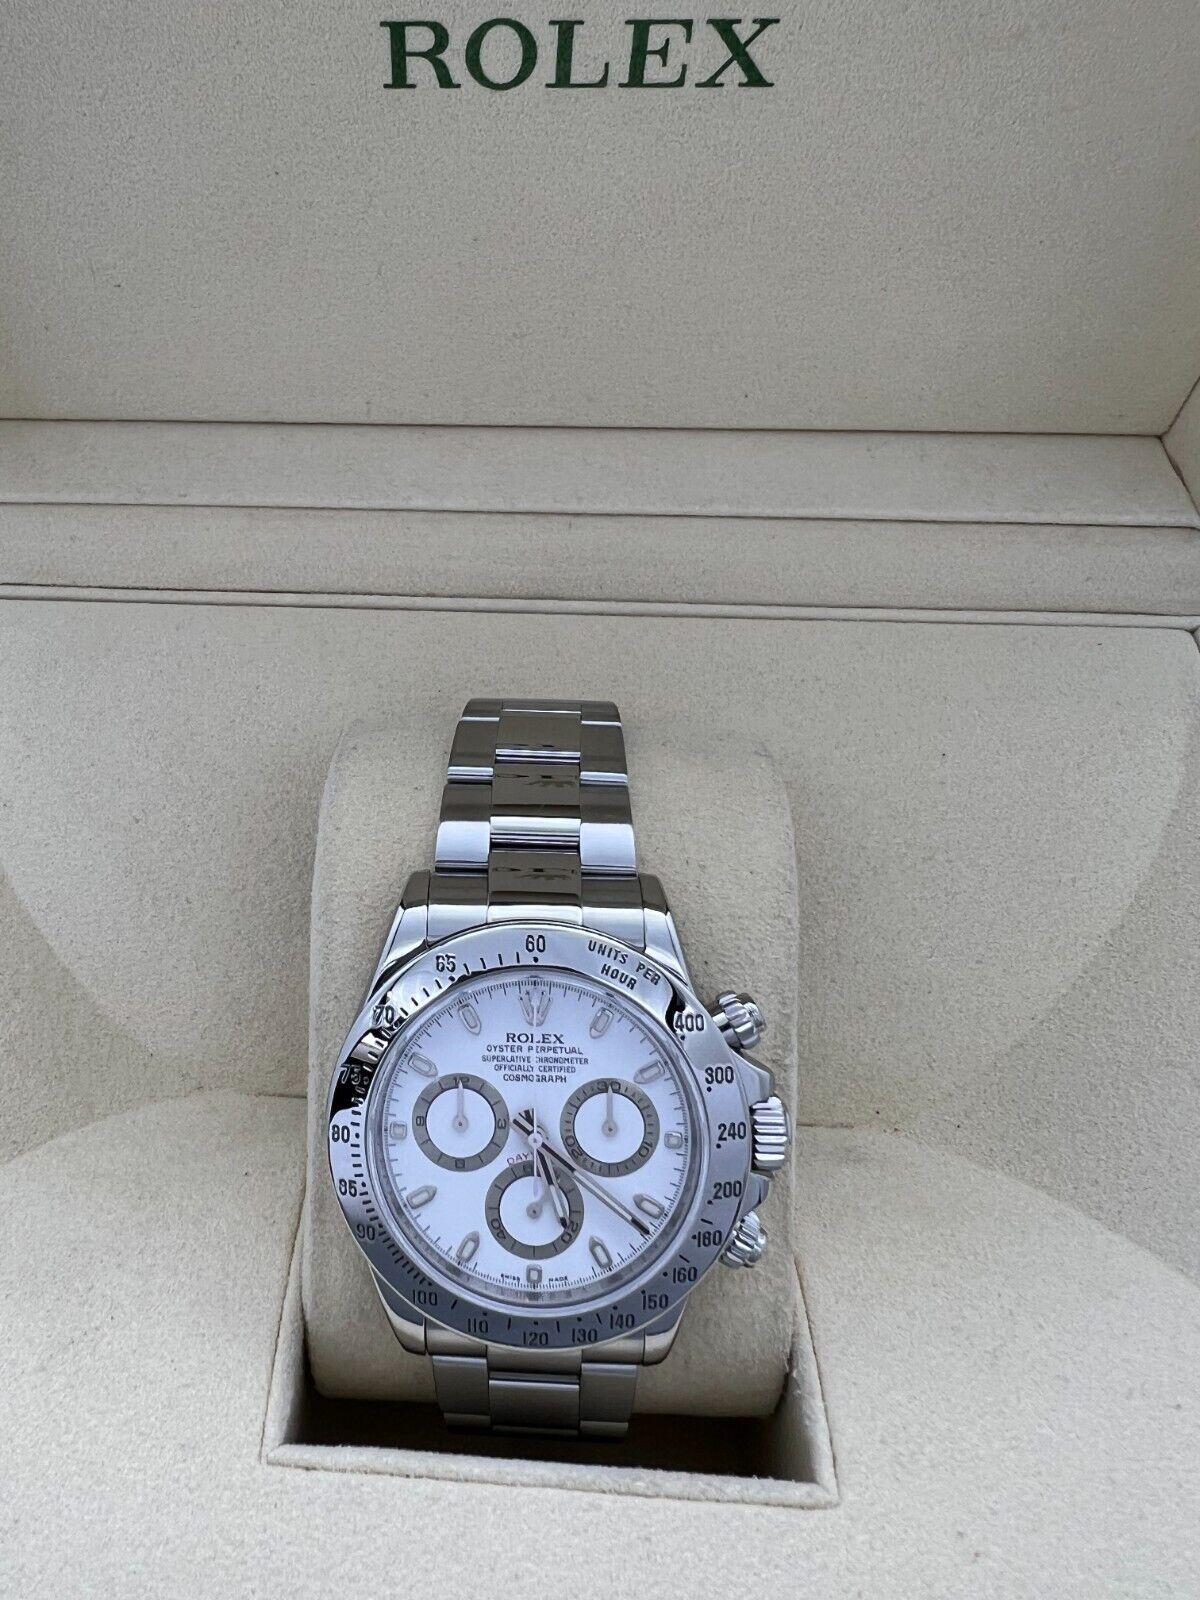 Style Number: 116520

Serial: V603****

Year: 2008 - OPEN CARD
 
Model: Daytona
 
Case Material: Stainless Steel 
 
Band:  Stainless Steel
 
Bezel:  Stainless Steel
 
Dial: White
 
Face: Sapphire Crystal 
 
Case Size: 40mm 
 
Includes: 
-Rolex Box &